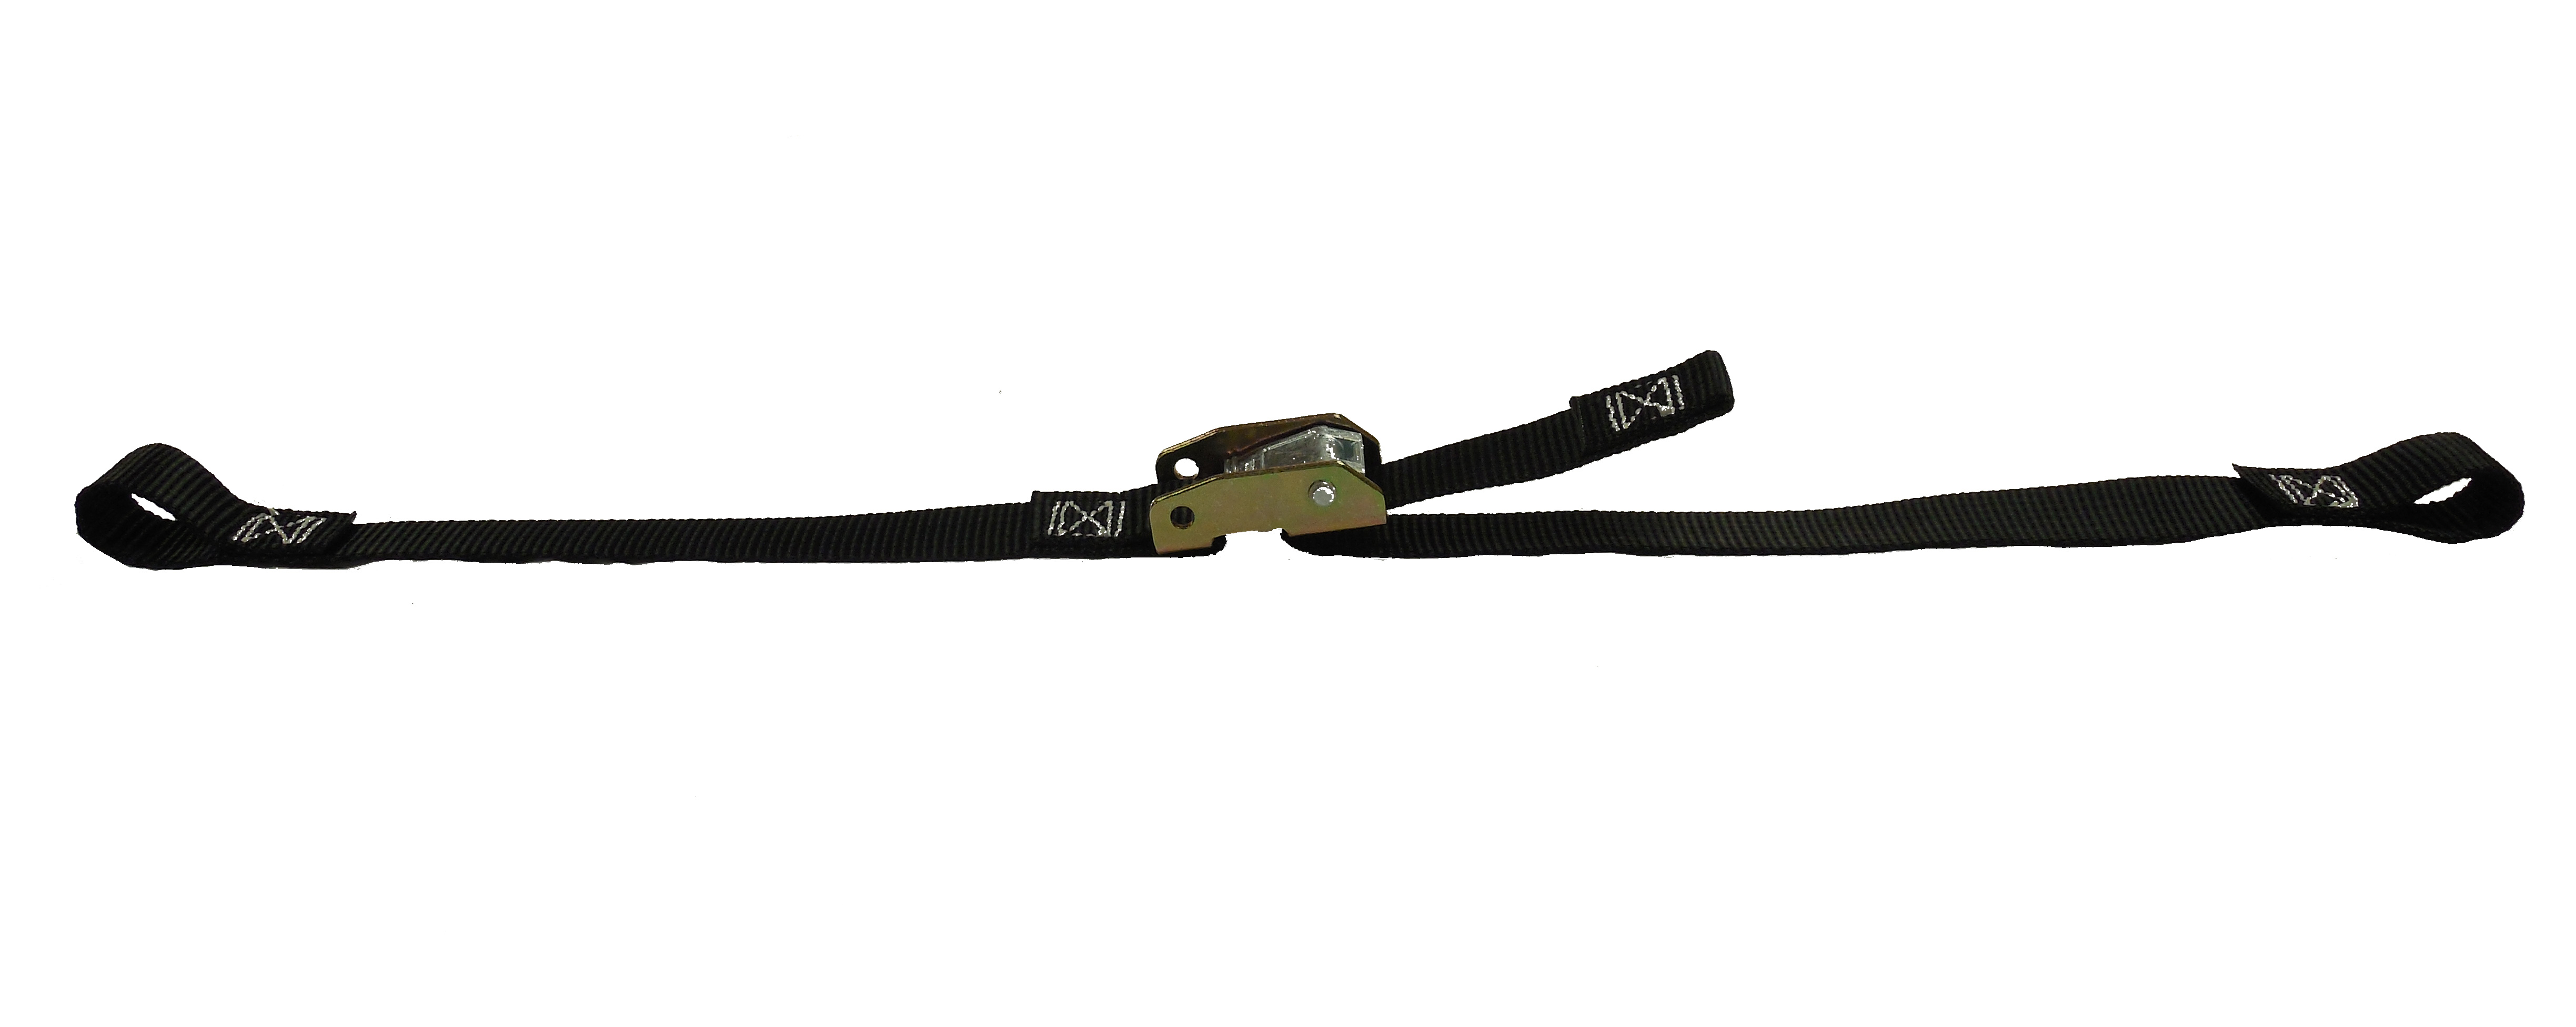 2-Inch Fixed End Ratchet Strap - 1 Foot Long